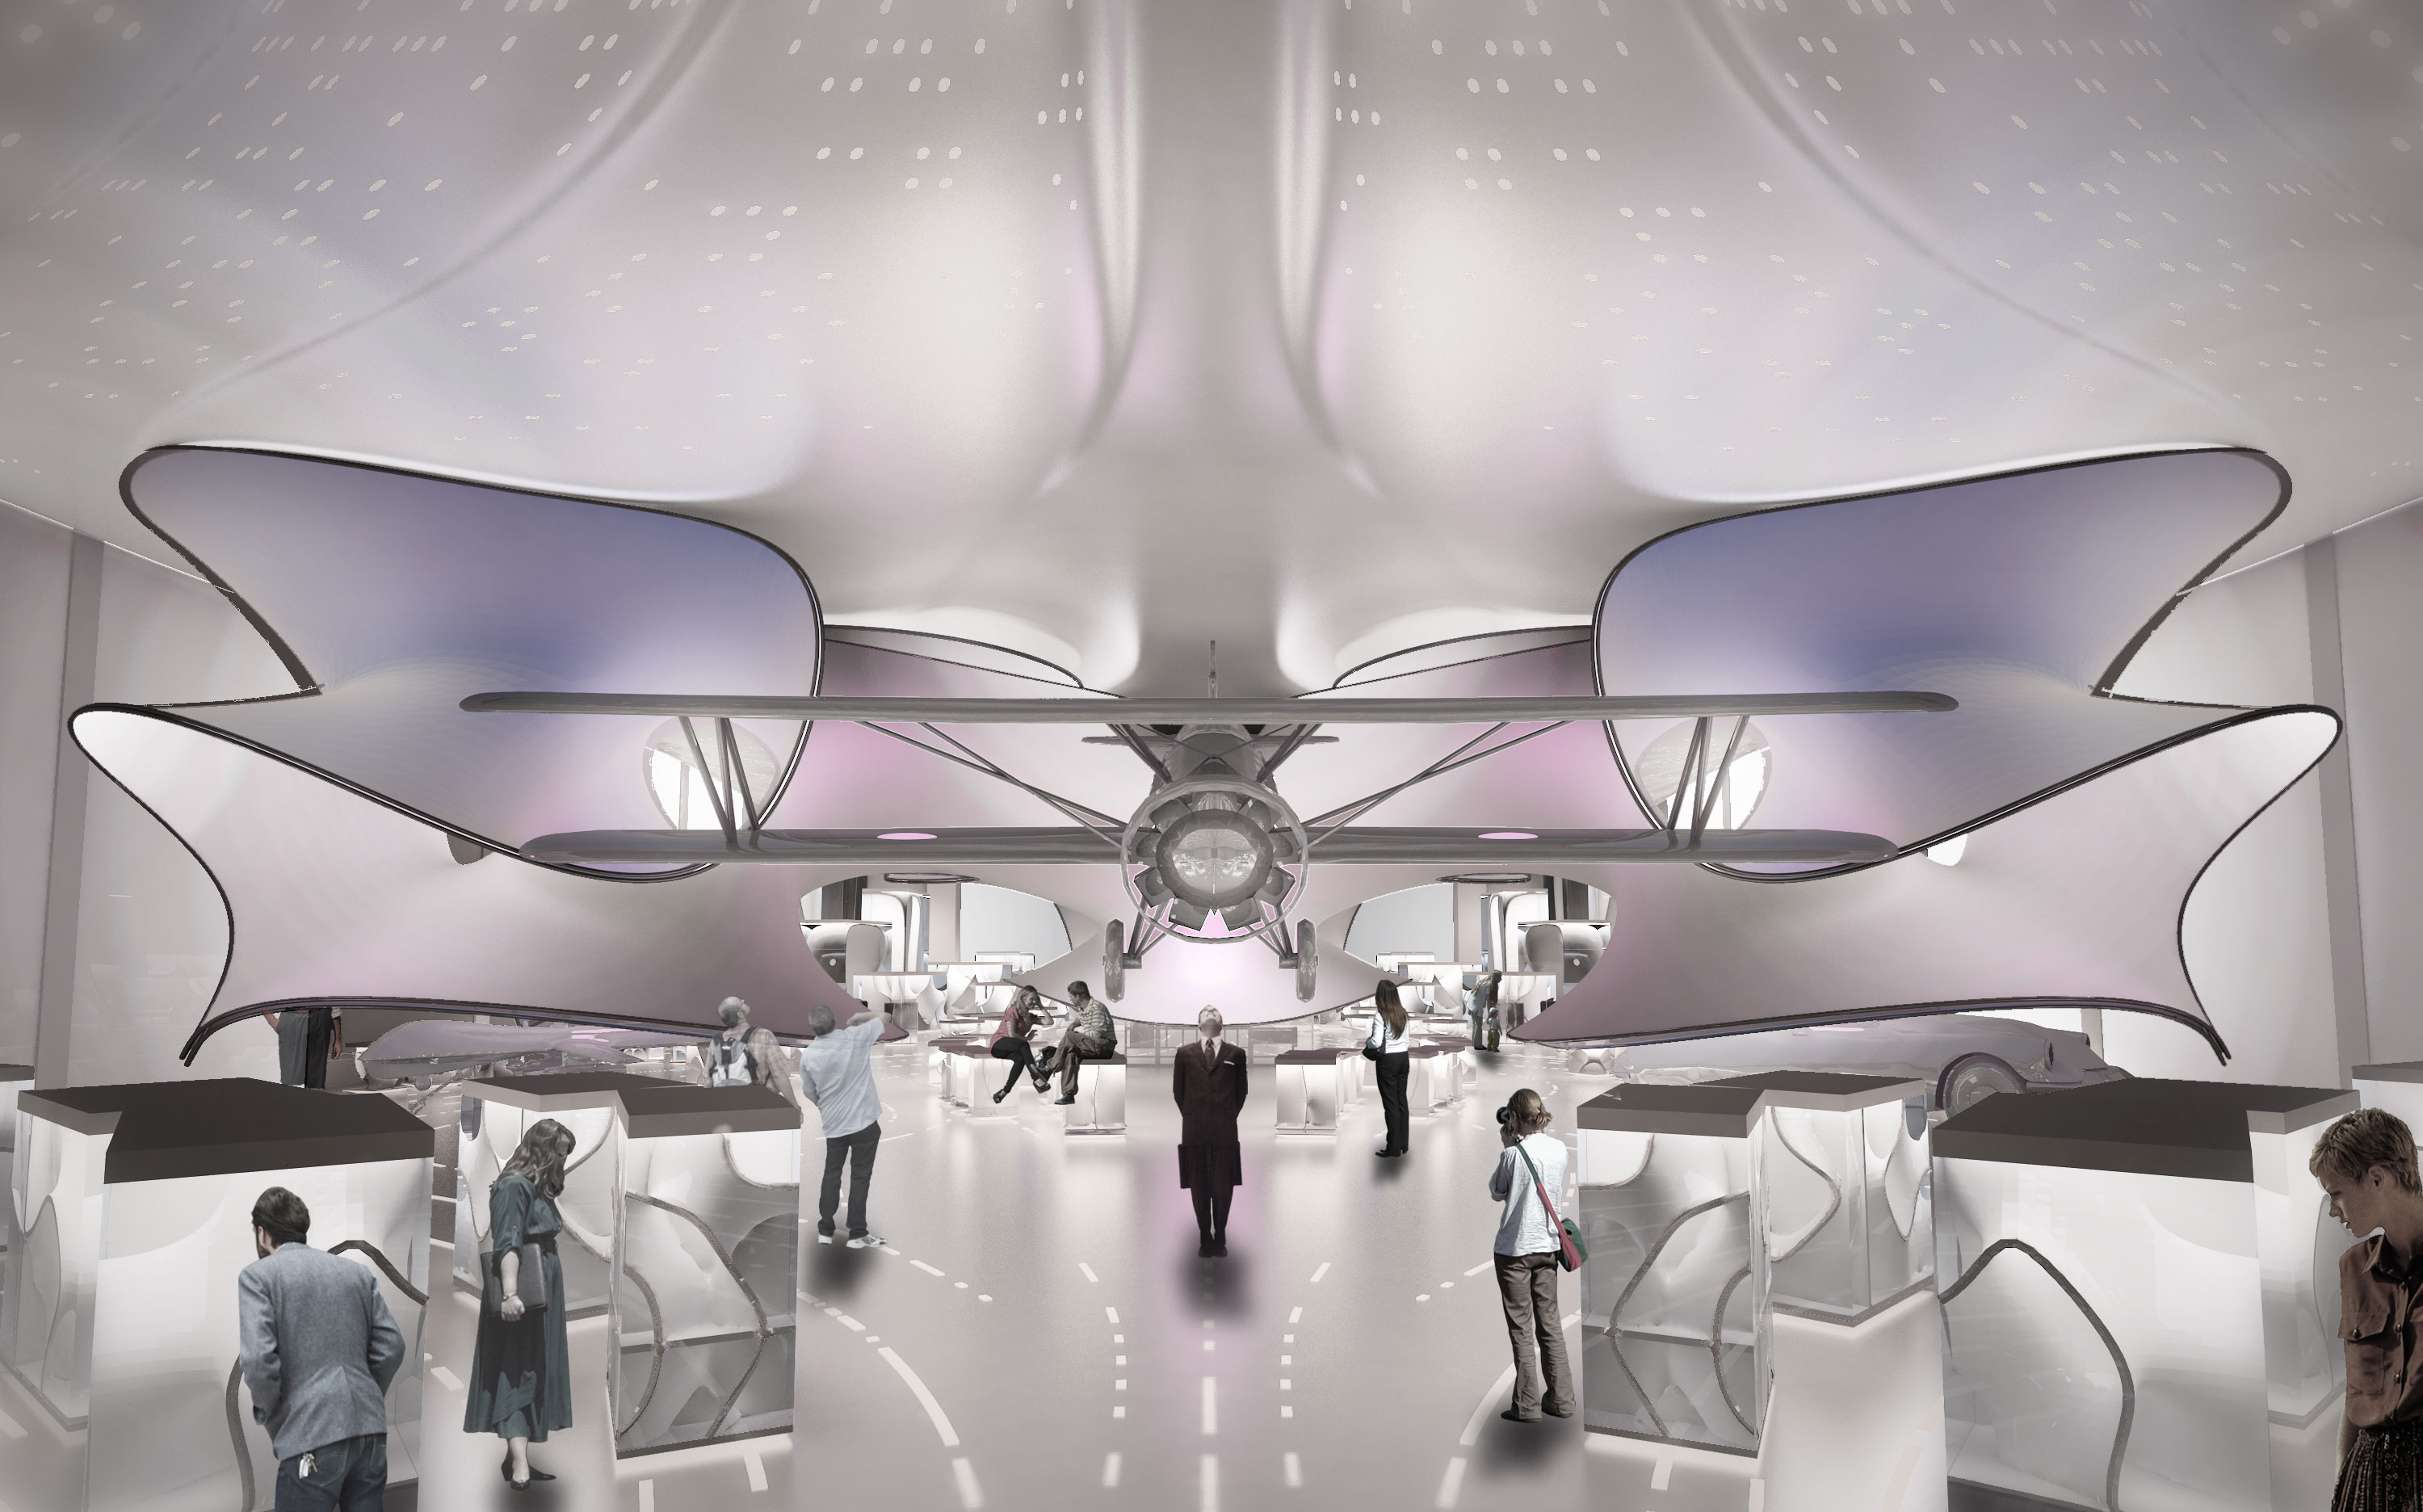 A view of the new Science Museum Mathematics Gallery featuring the Handley Page aircraft. Credit: Zaha Hadid Architects